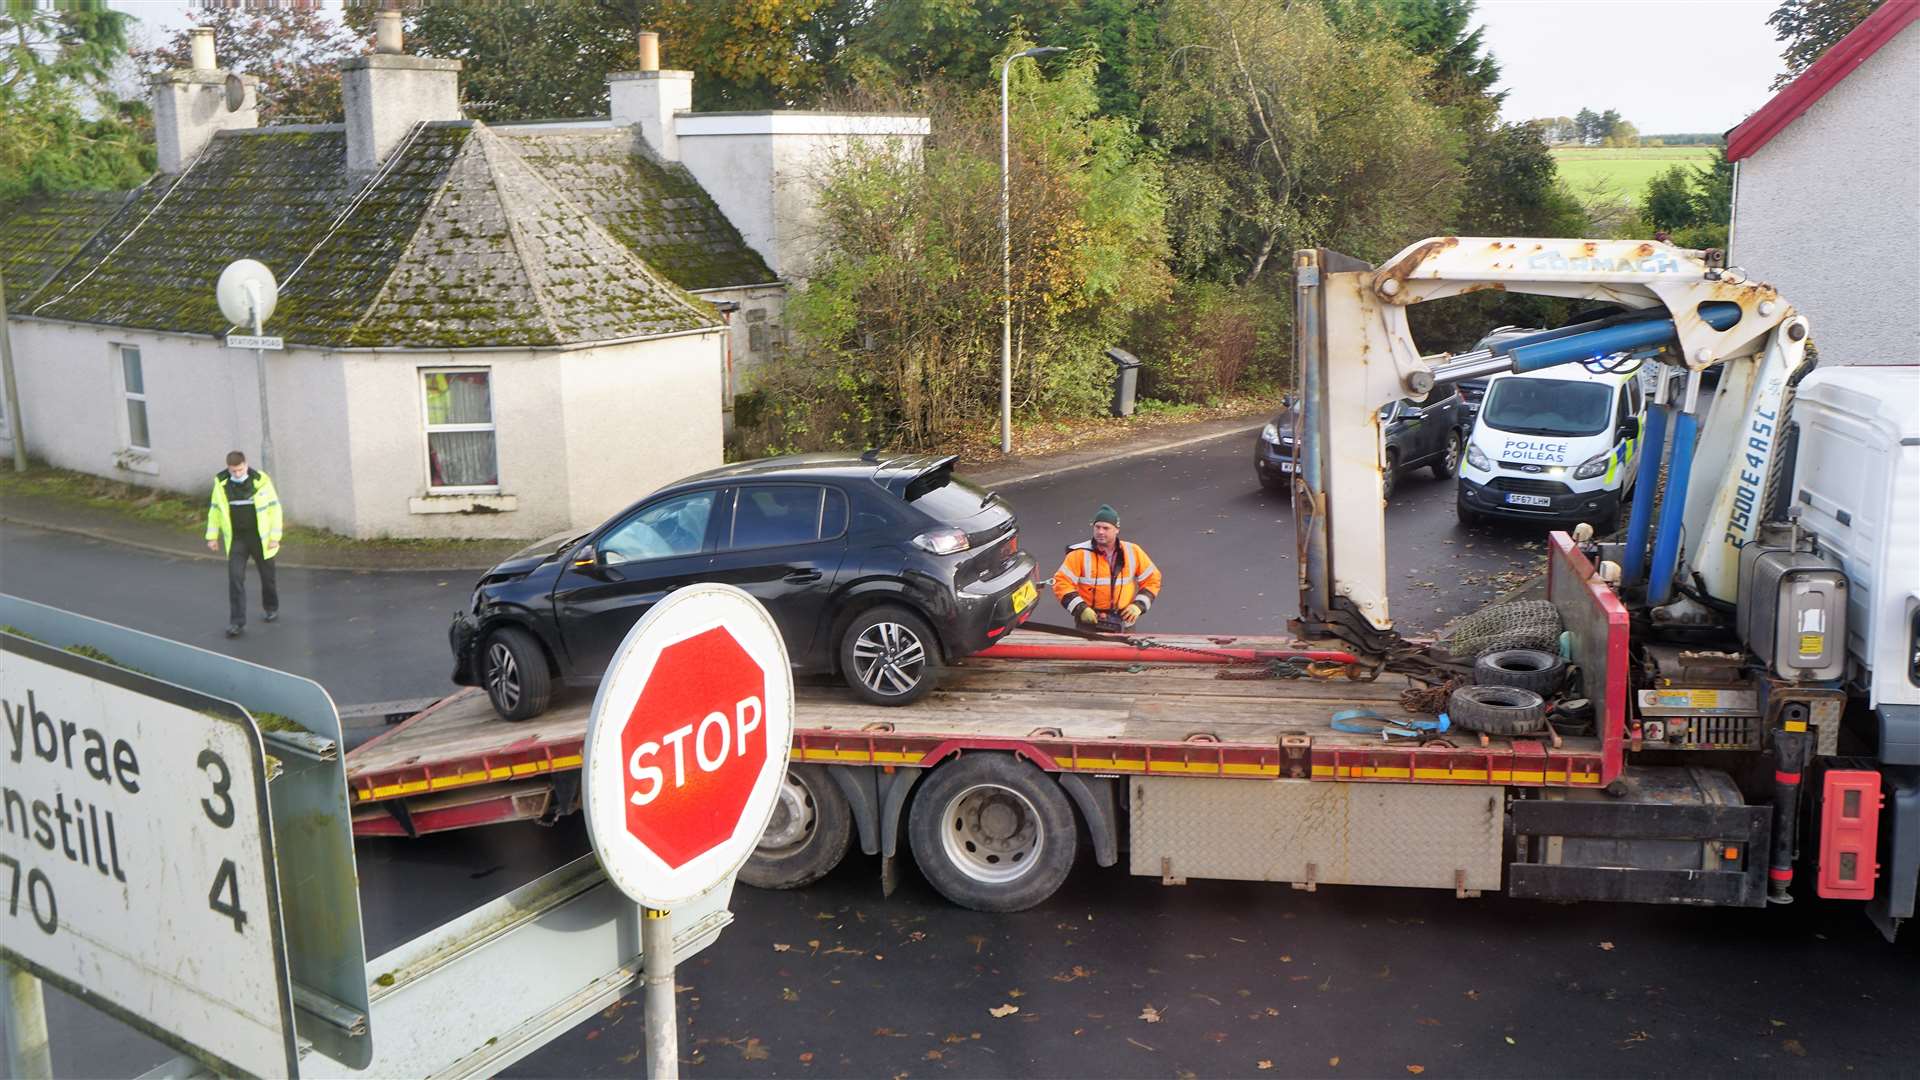 A car is uplifted after another incident at the unmarked crossroads in October last year.